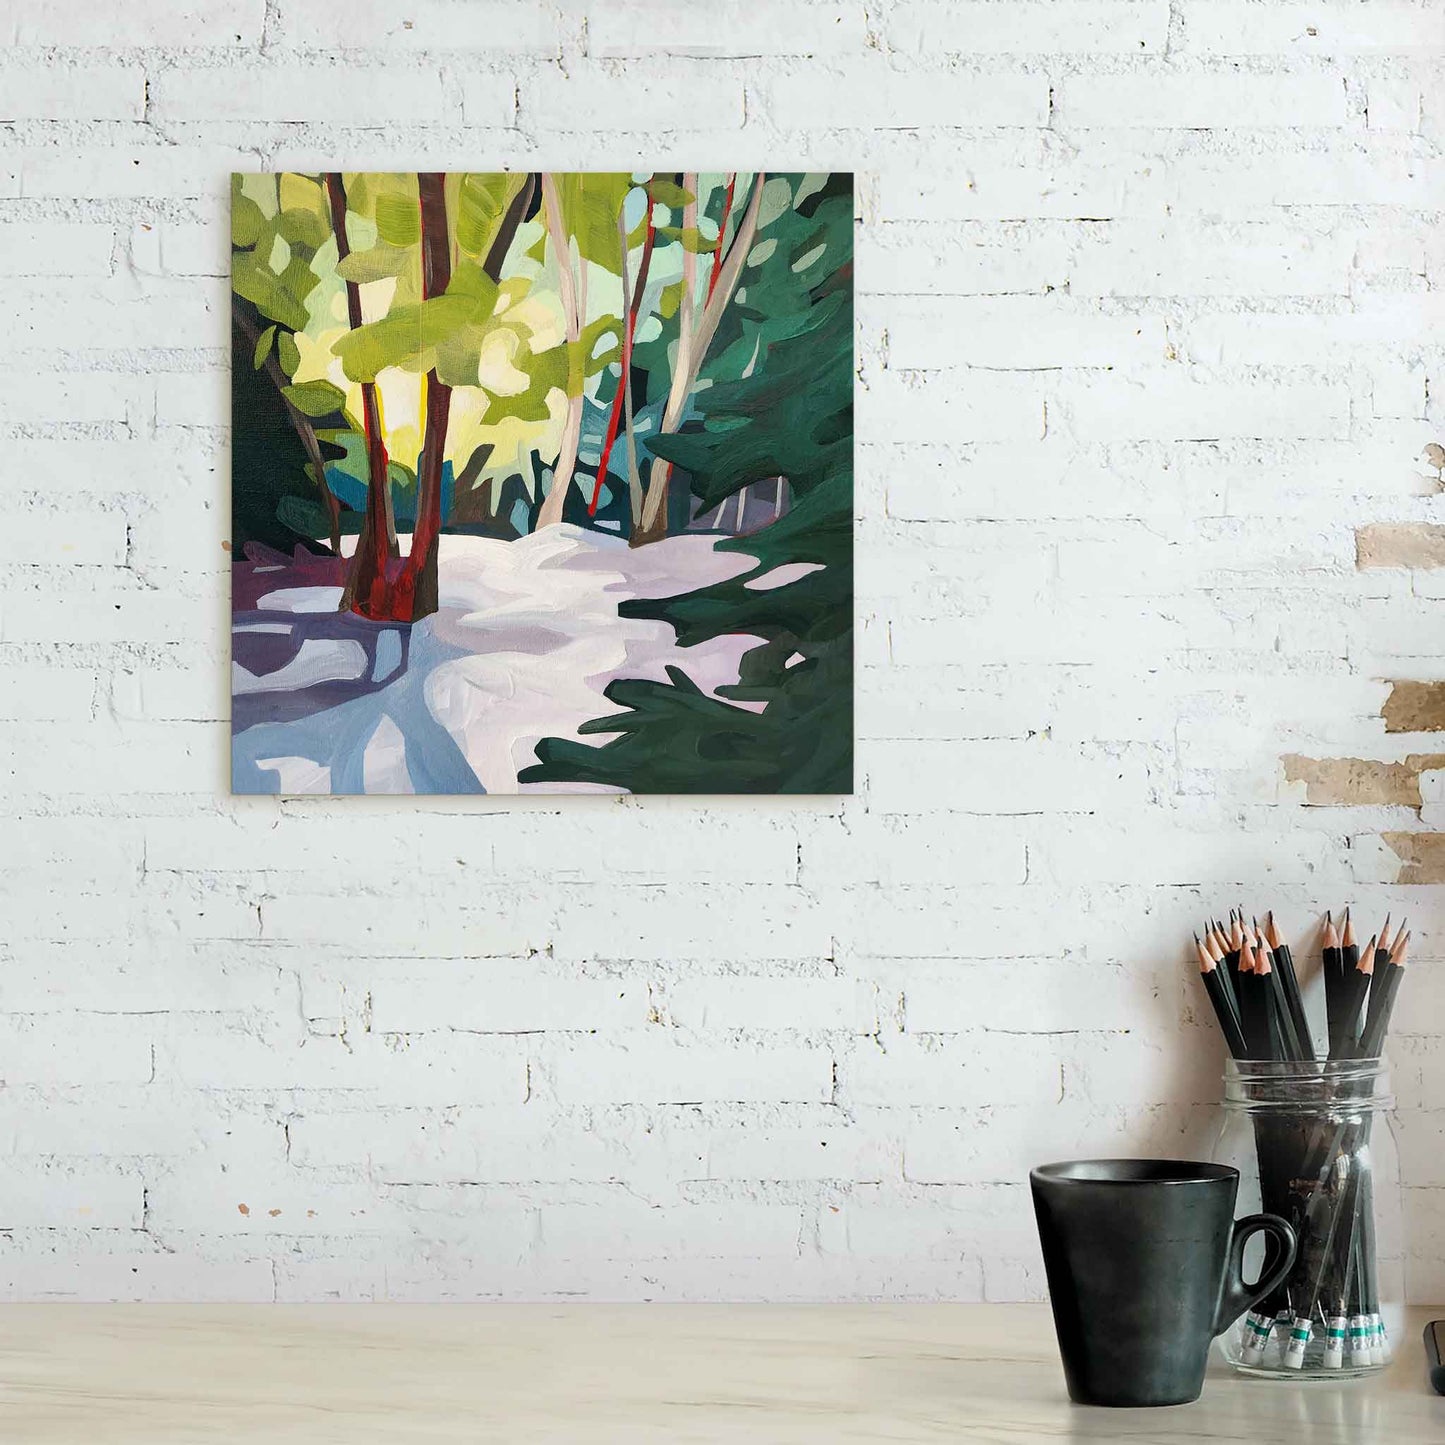 abstract forest painting of a lush forest in winter hanging over counter against a white brick wall